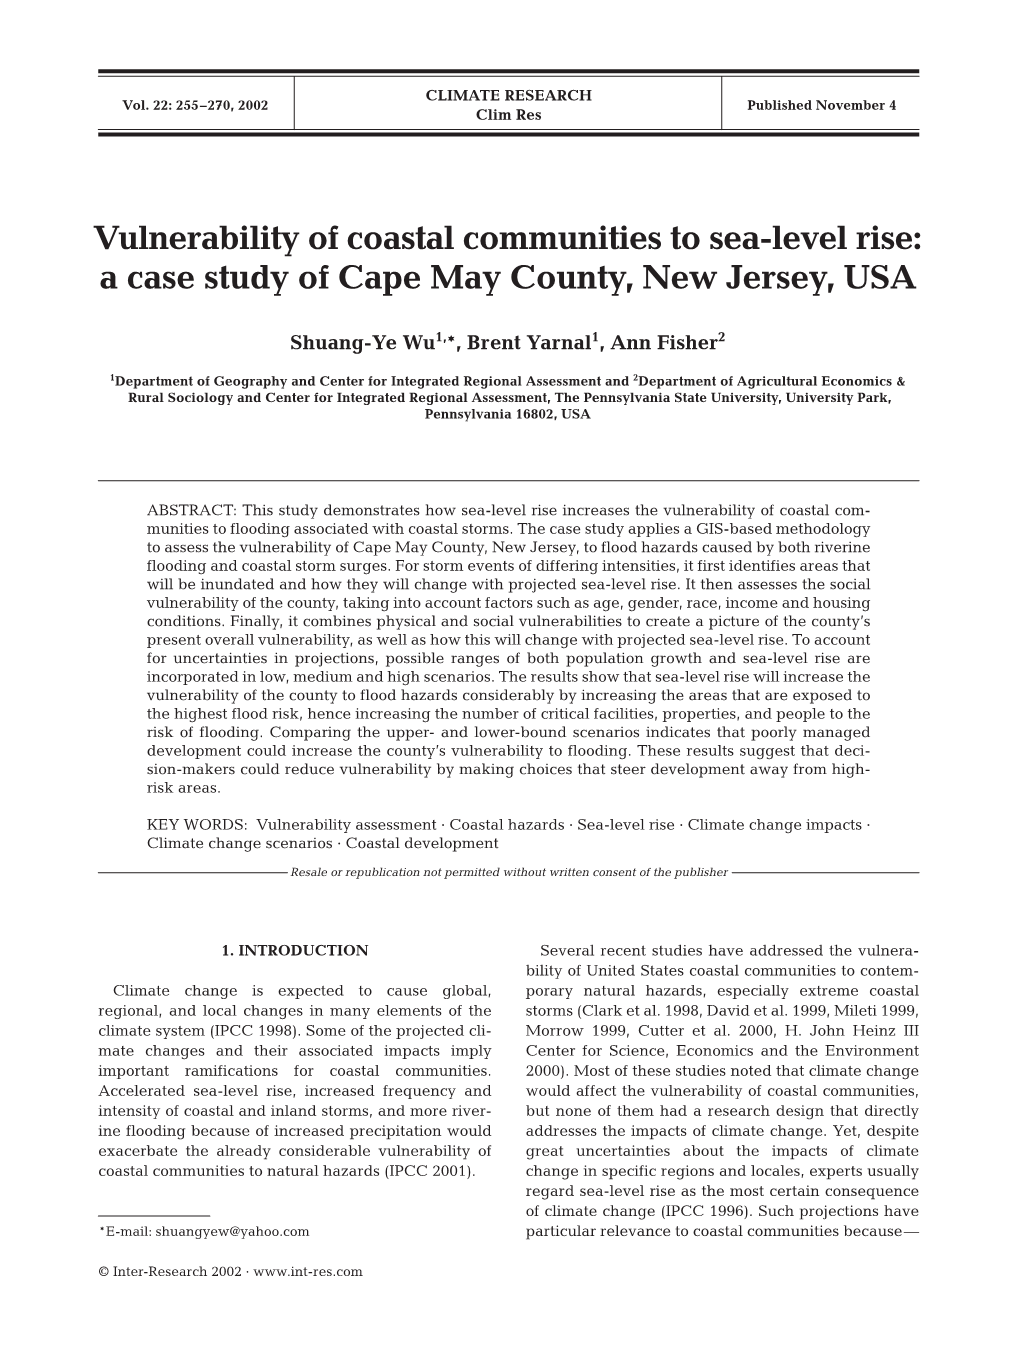 Vulnerability of Coastal Communities to Sea-Level Rise: a Case Study of Cape May County, New Jersey, USA